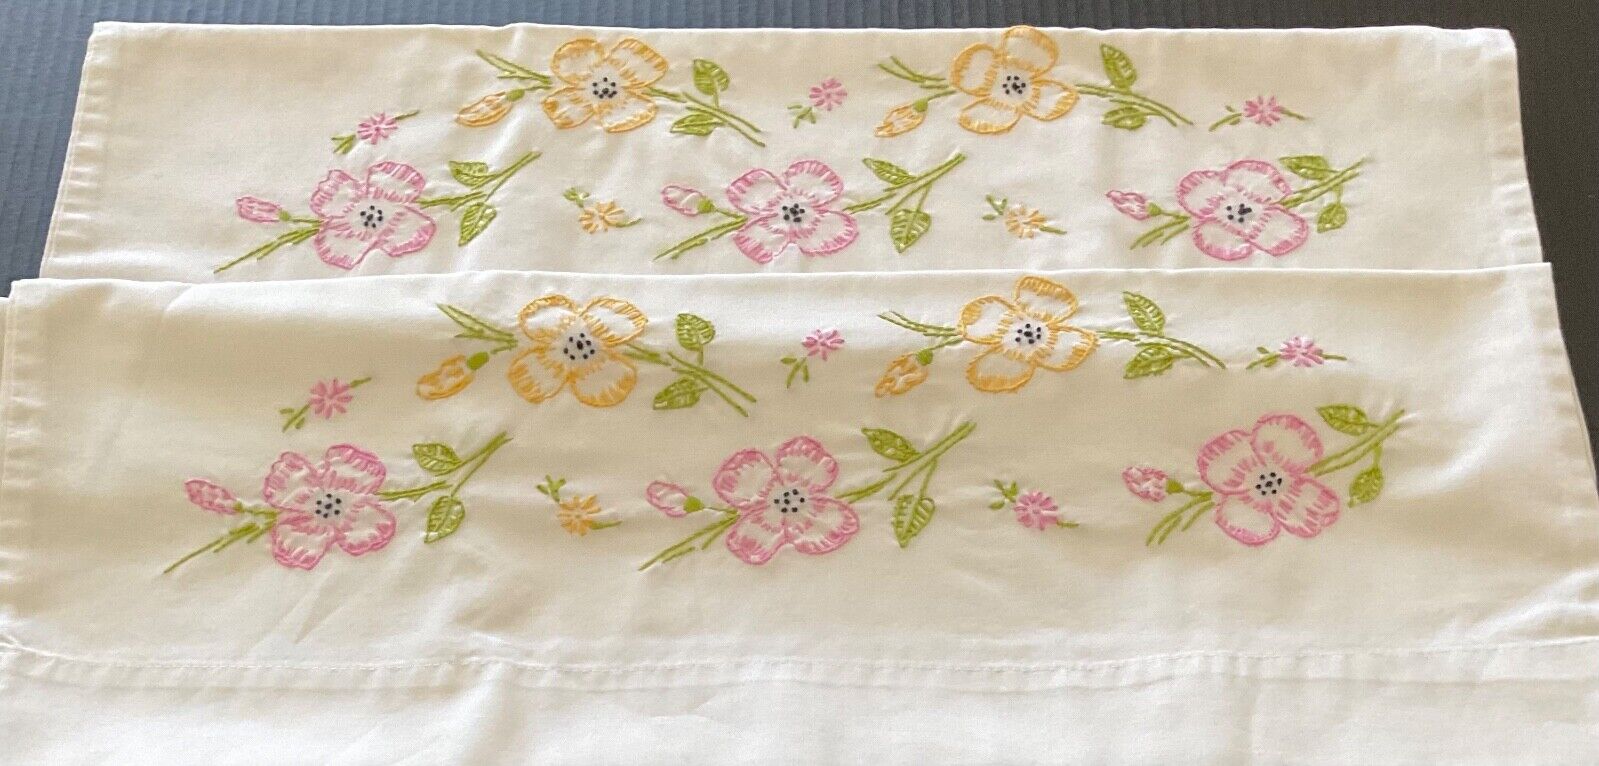 Vintage pair of Embroidered Spring Floral Pillowcases. Very Good pre owned cond